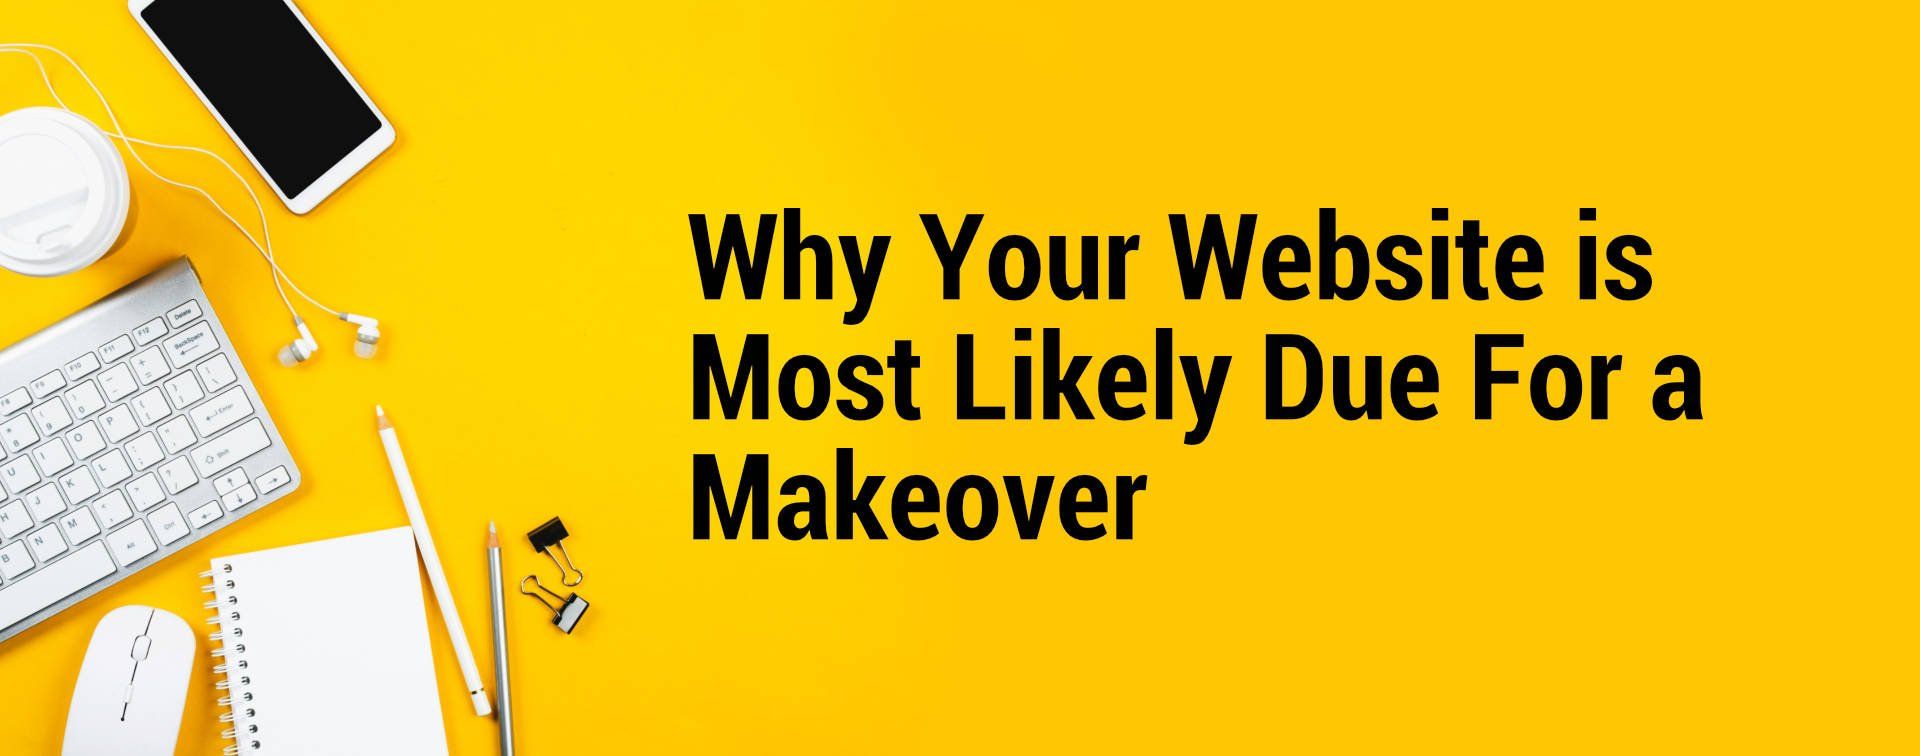 Why Your Website is Most Likely Due For a Makeover